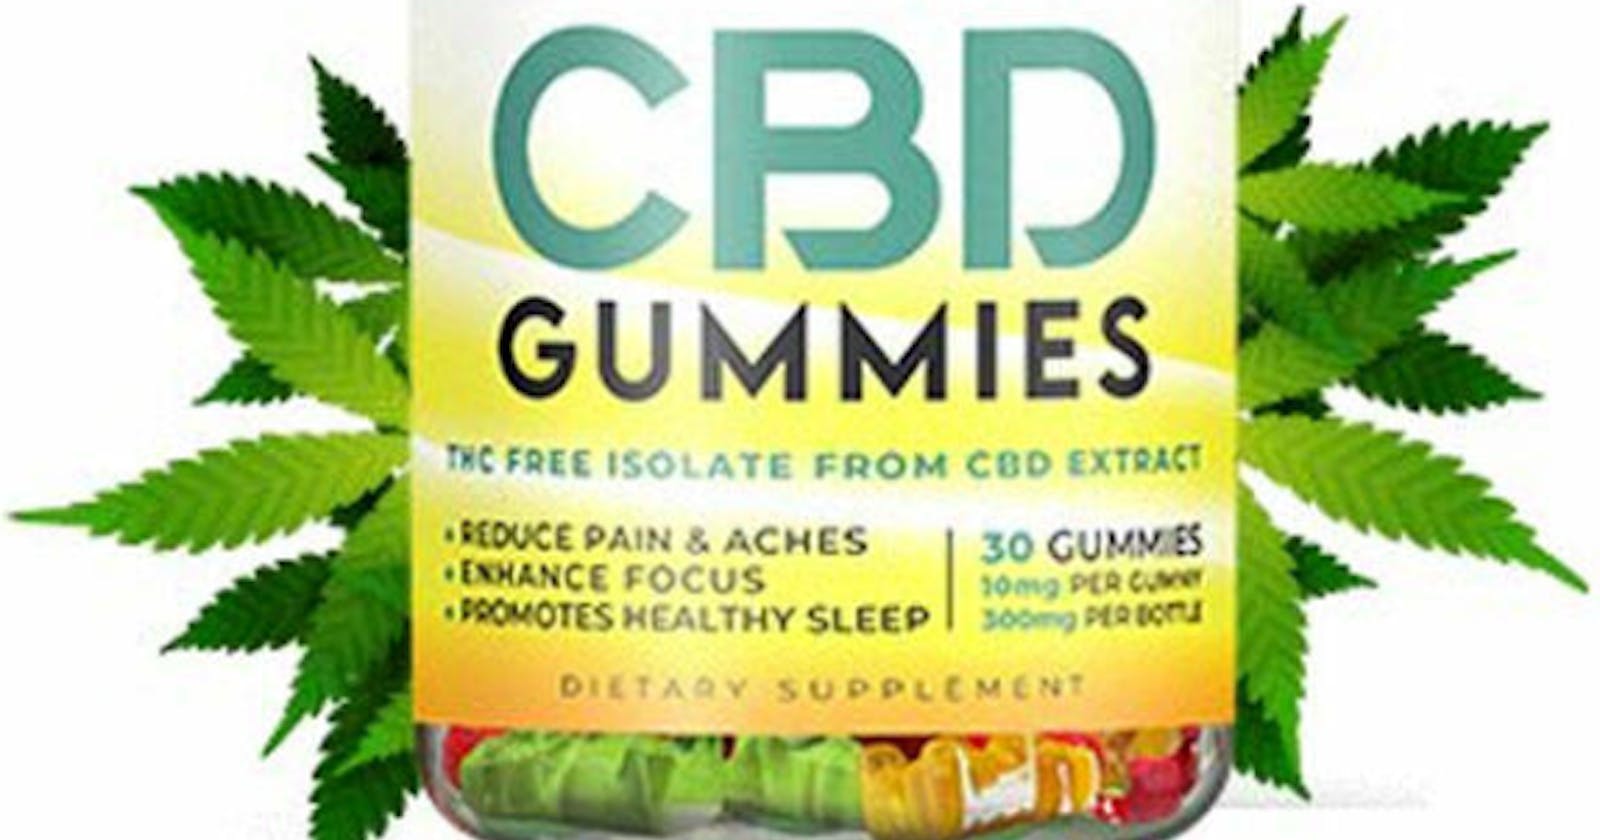 Soothe Zen CBD Gummies Buy From Official Site Review Scam OR Legit Reviews?